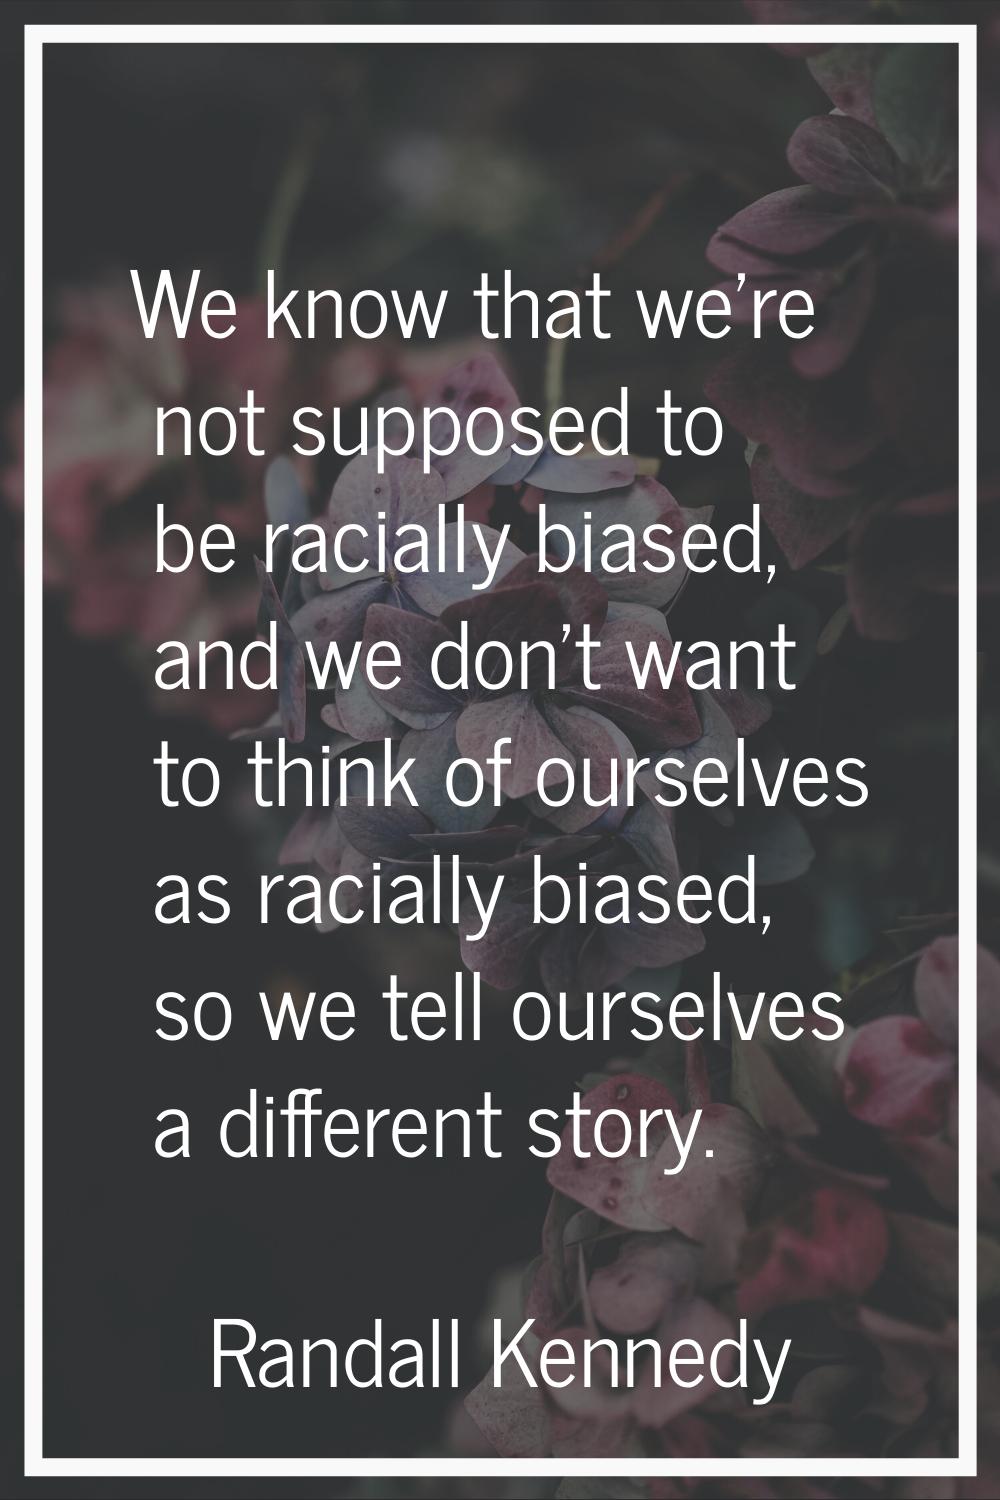 We know that we're not supposed to be racially biased, and we don't want to think of ourselves as r